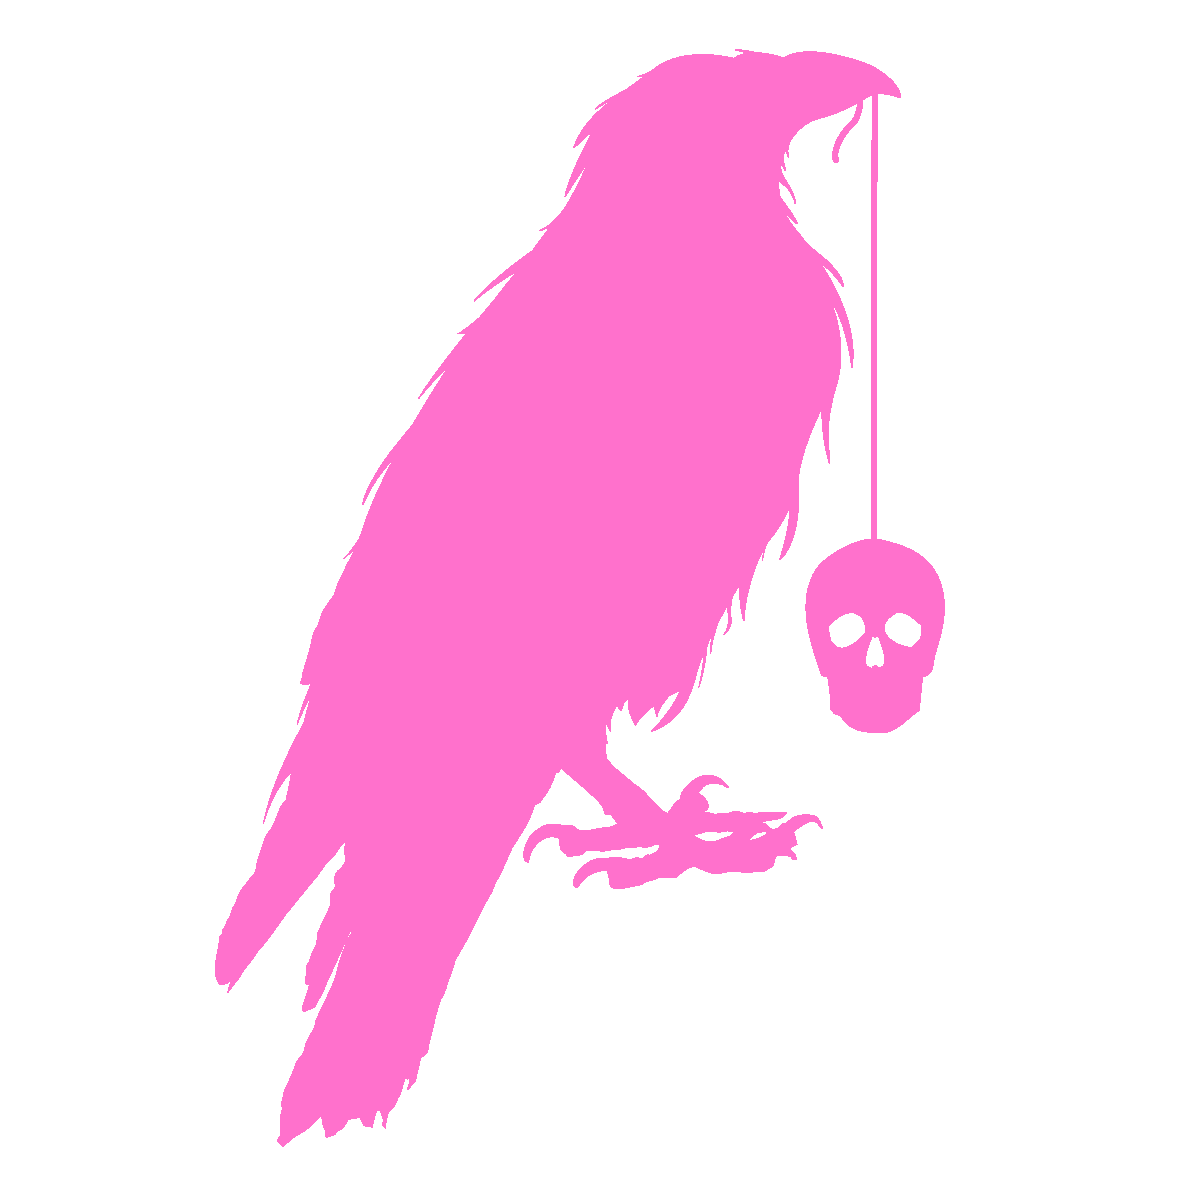 logo of a raven holding a skull on a string